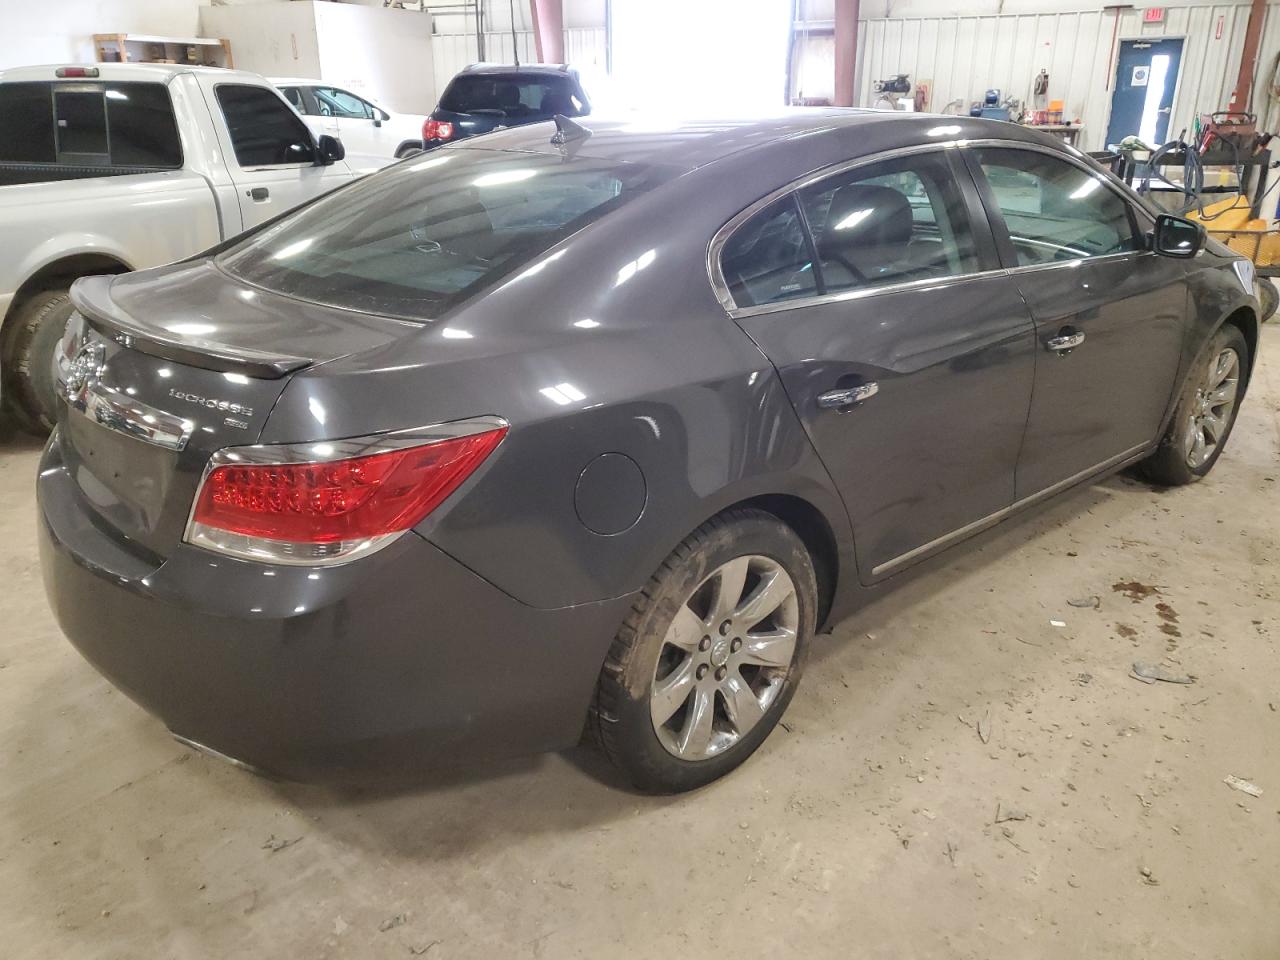 1G4GG5G33DF192374  - BUICK LACROSSE  2013 IMG - 2